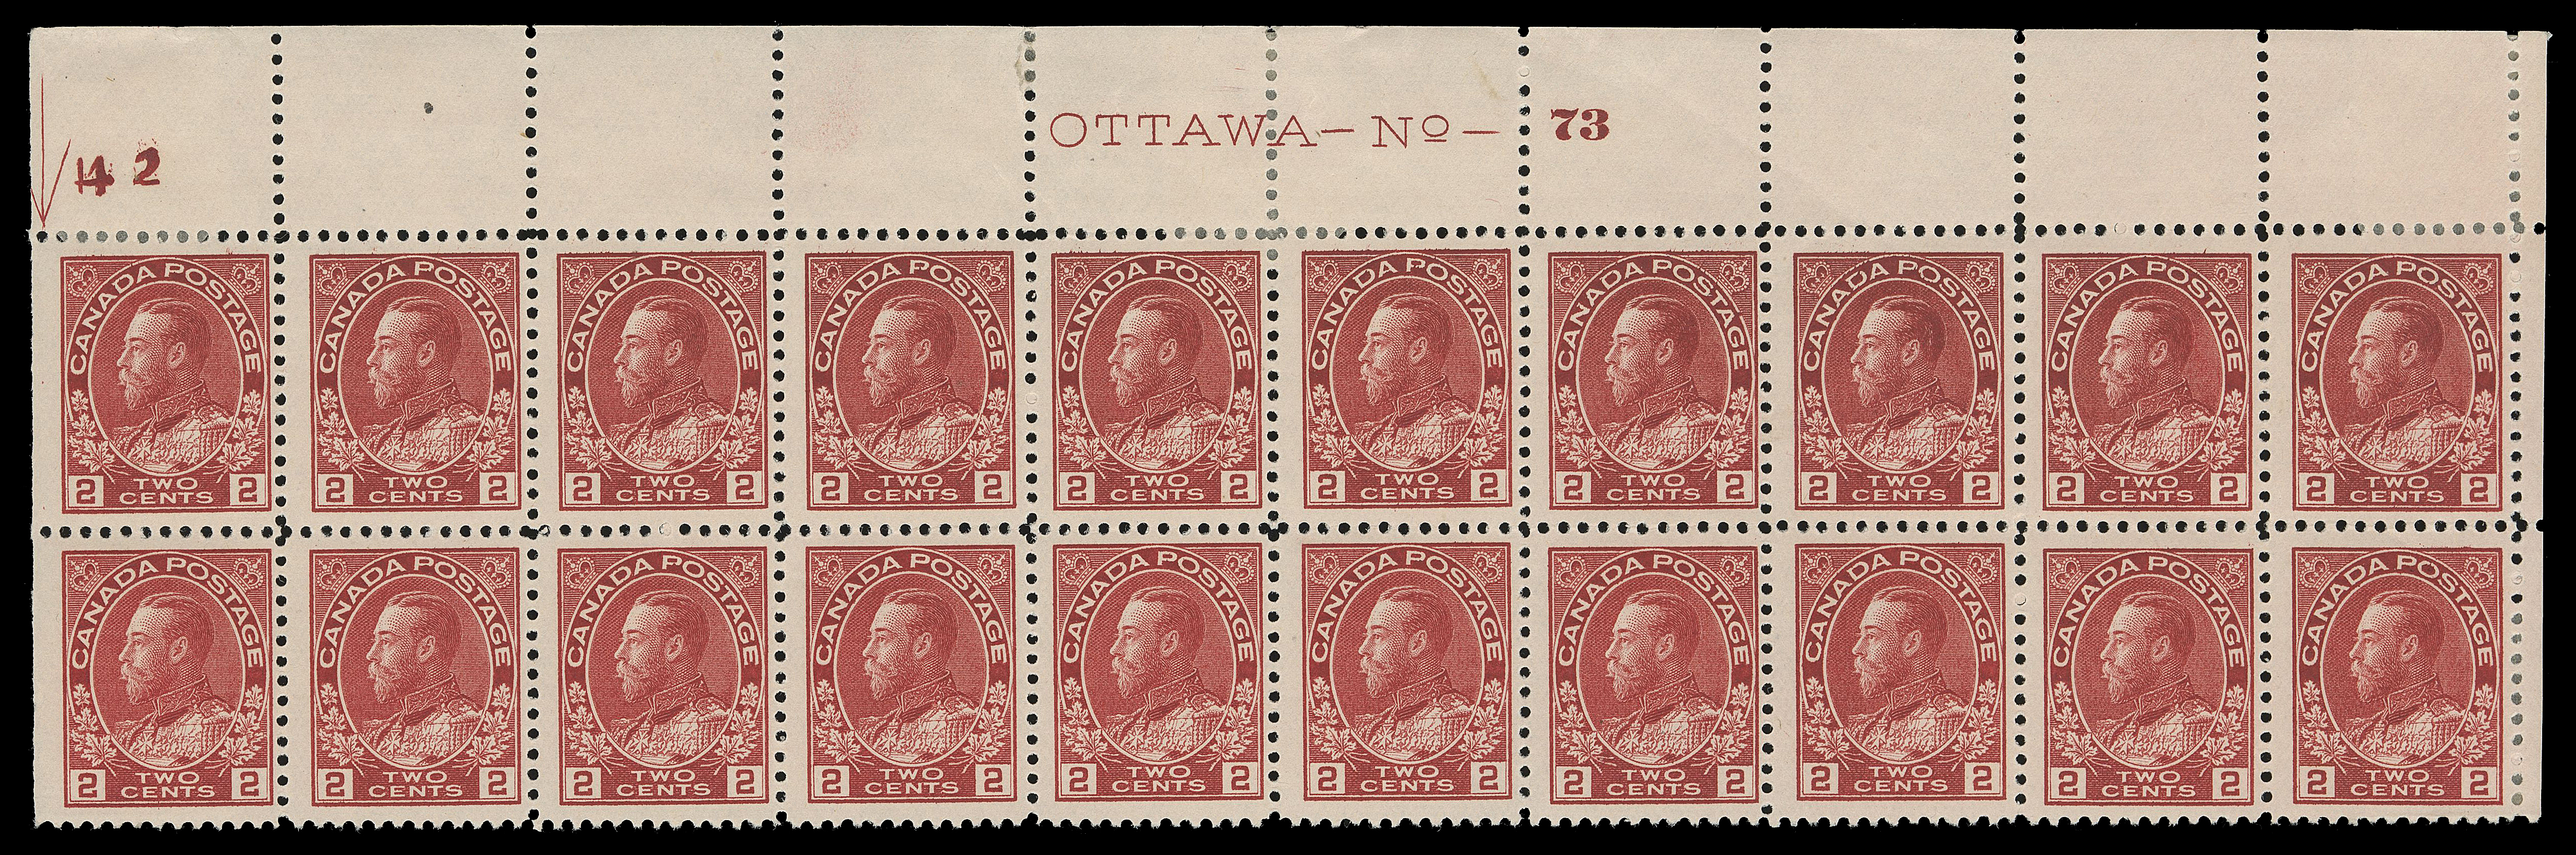 ADMIRAL STAMPS  106,Matching upper right Plates 73 & 74 strips of twenty with printing order number "242" at left, hinged on two and five stamps respectively, both strips quite well centered with great colour, F-VF (Unitrade cat. $2,410)